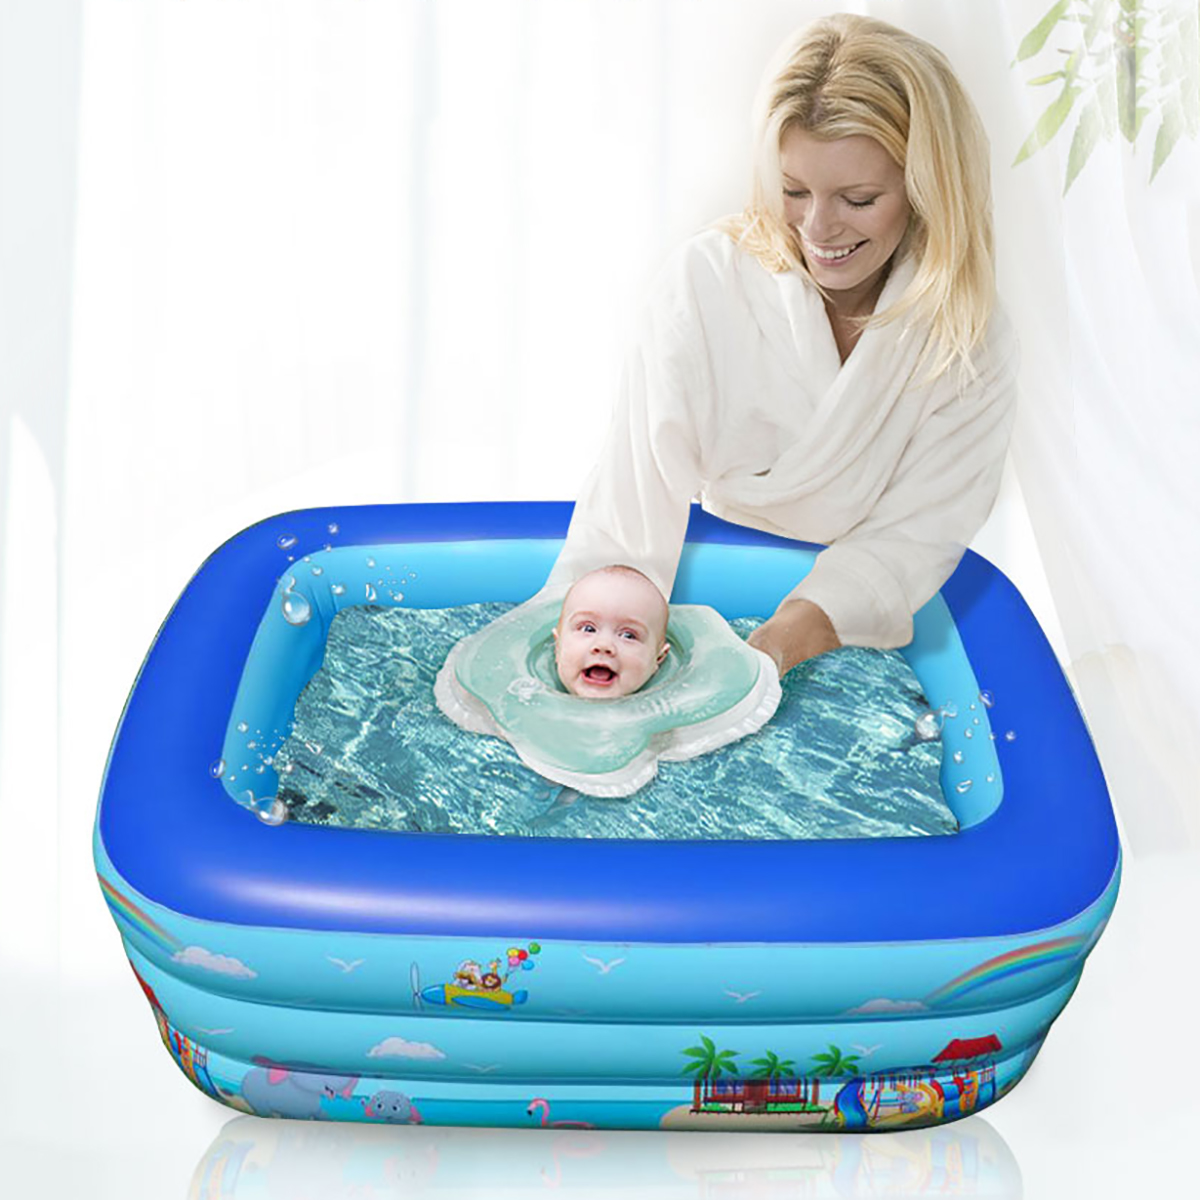 Thickened-PVC-Inflatable-Swimming-Pool-Childrens-Swimming-Pool-Bath-Tub-Outdoor-Indoor-Play-Pool-Chi-1856509-18